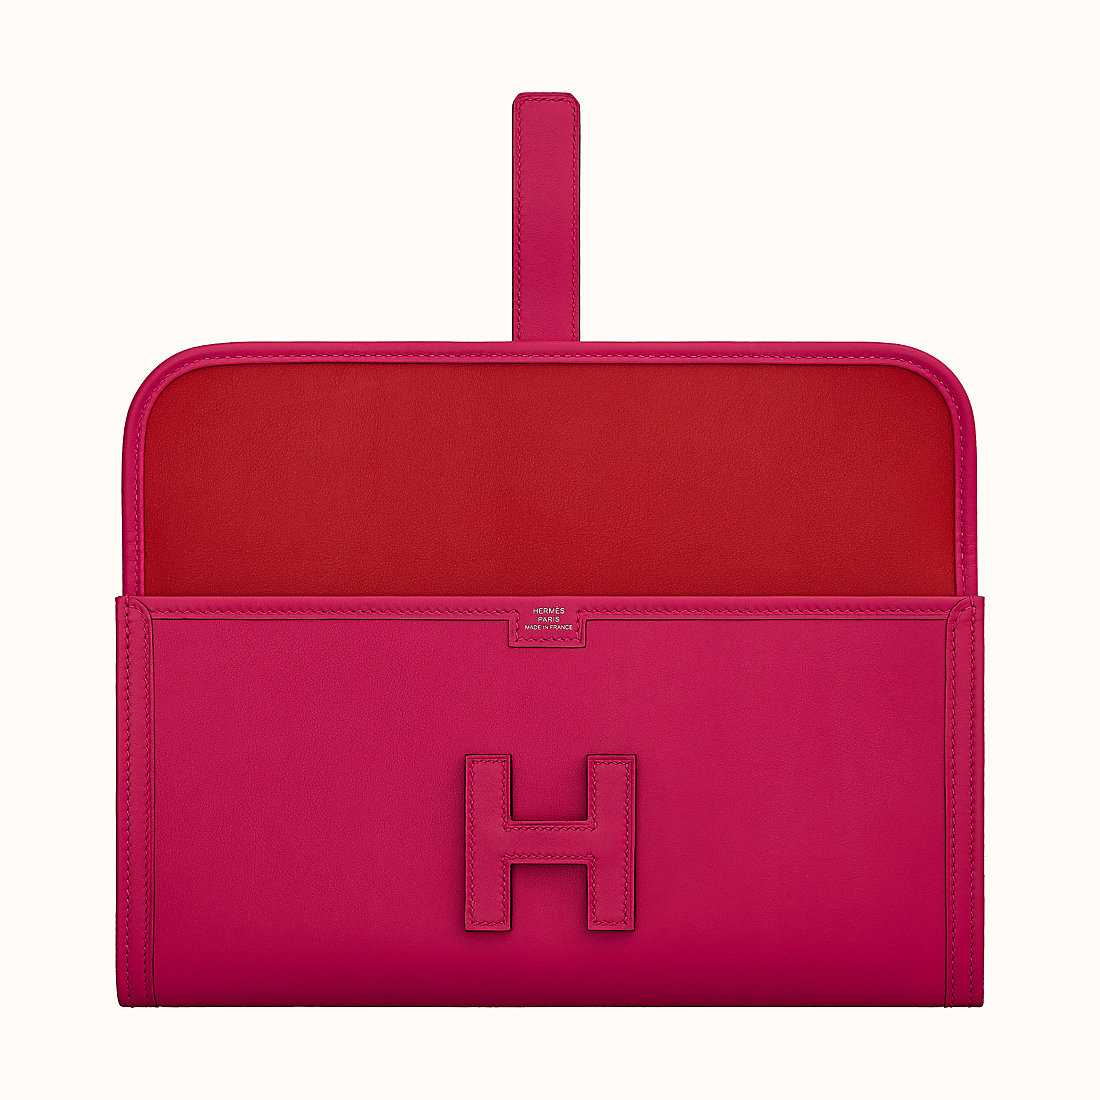 Macao Hermes Jige Elan 29 verso clutch Rose Mexico/Rouge Piment